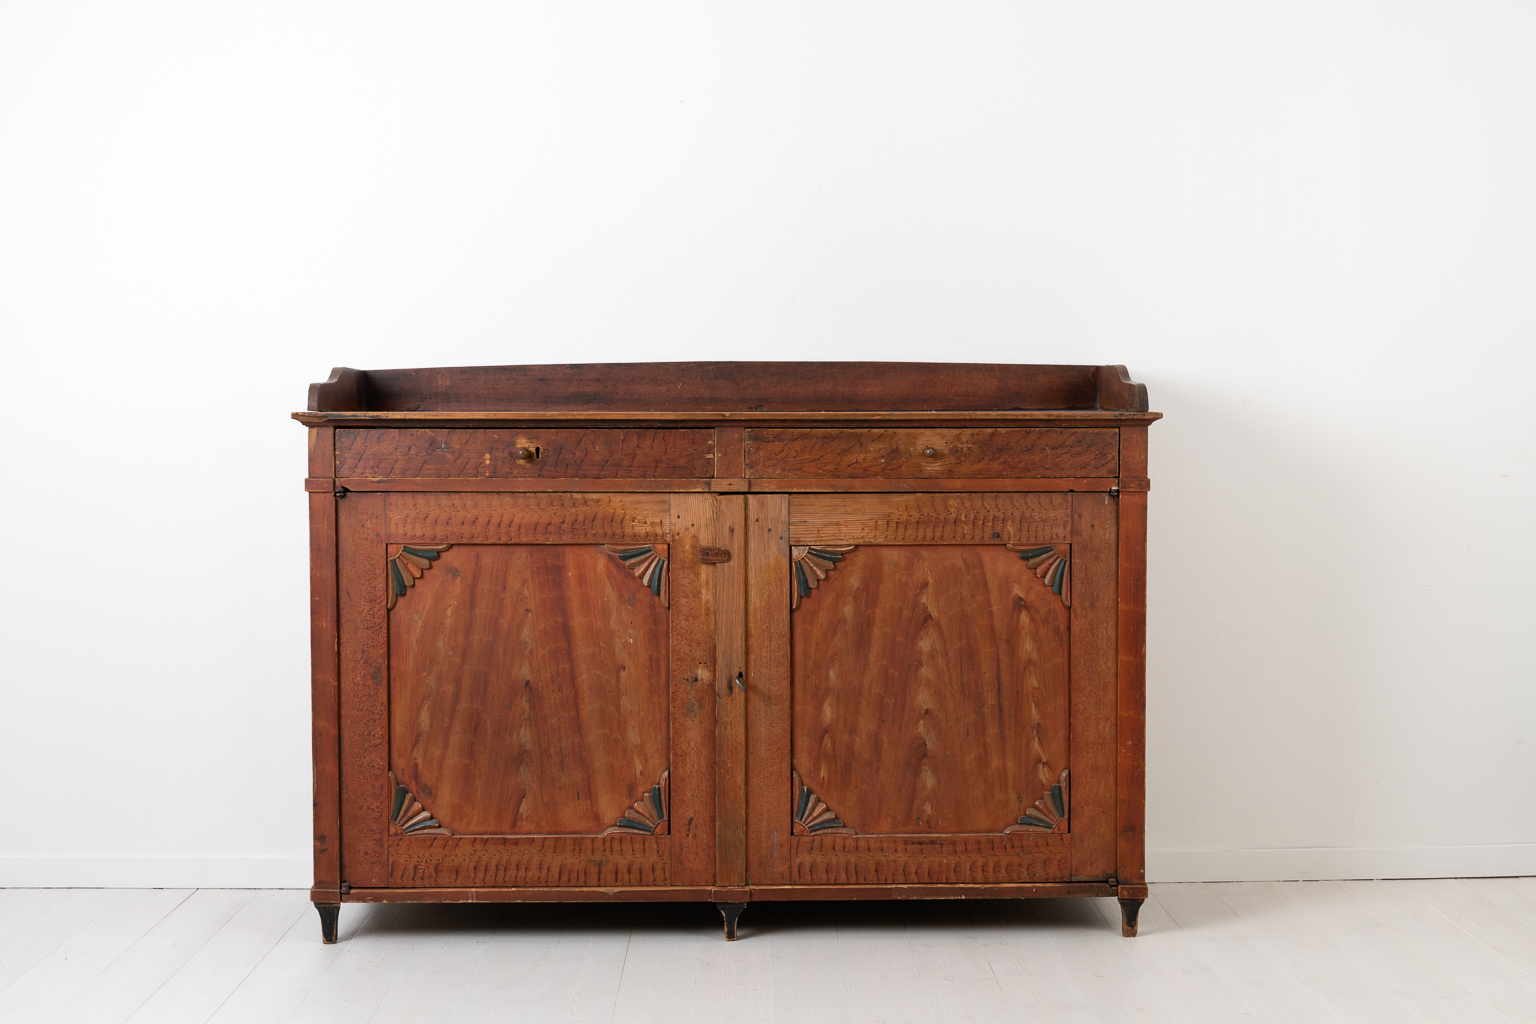 Low red gustavian sideboard from Northern Sweden. The sideboard is from the early 19th century, around 1810 to 1820, and is unusually low and wide